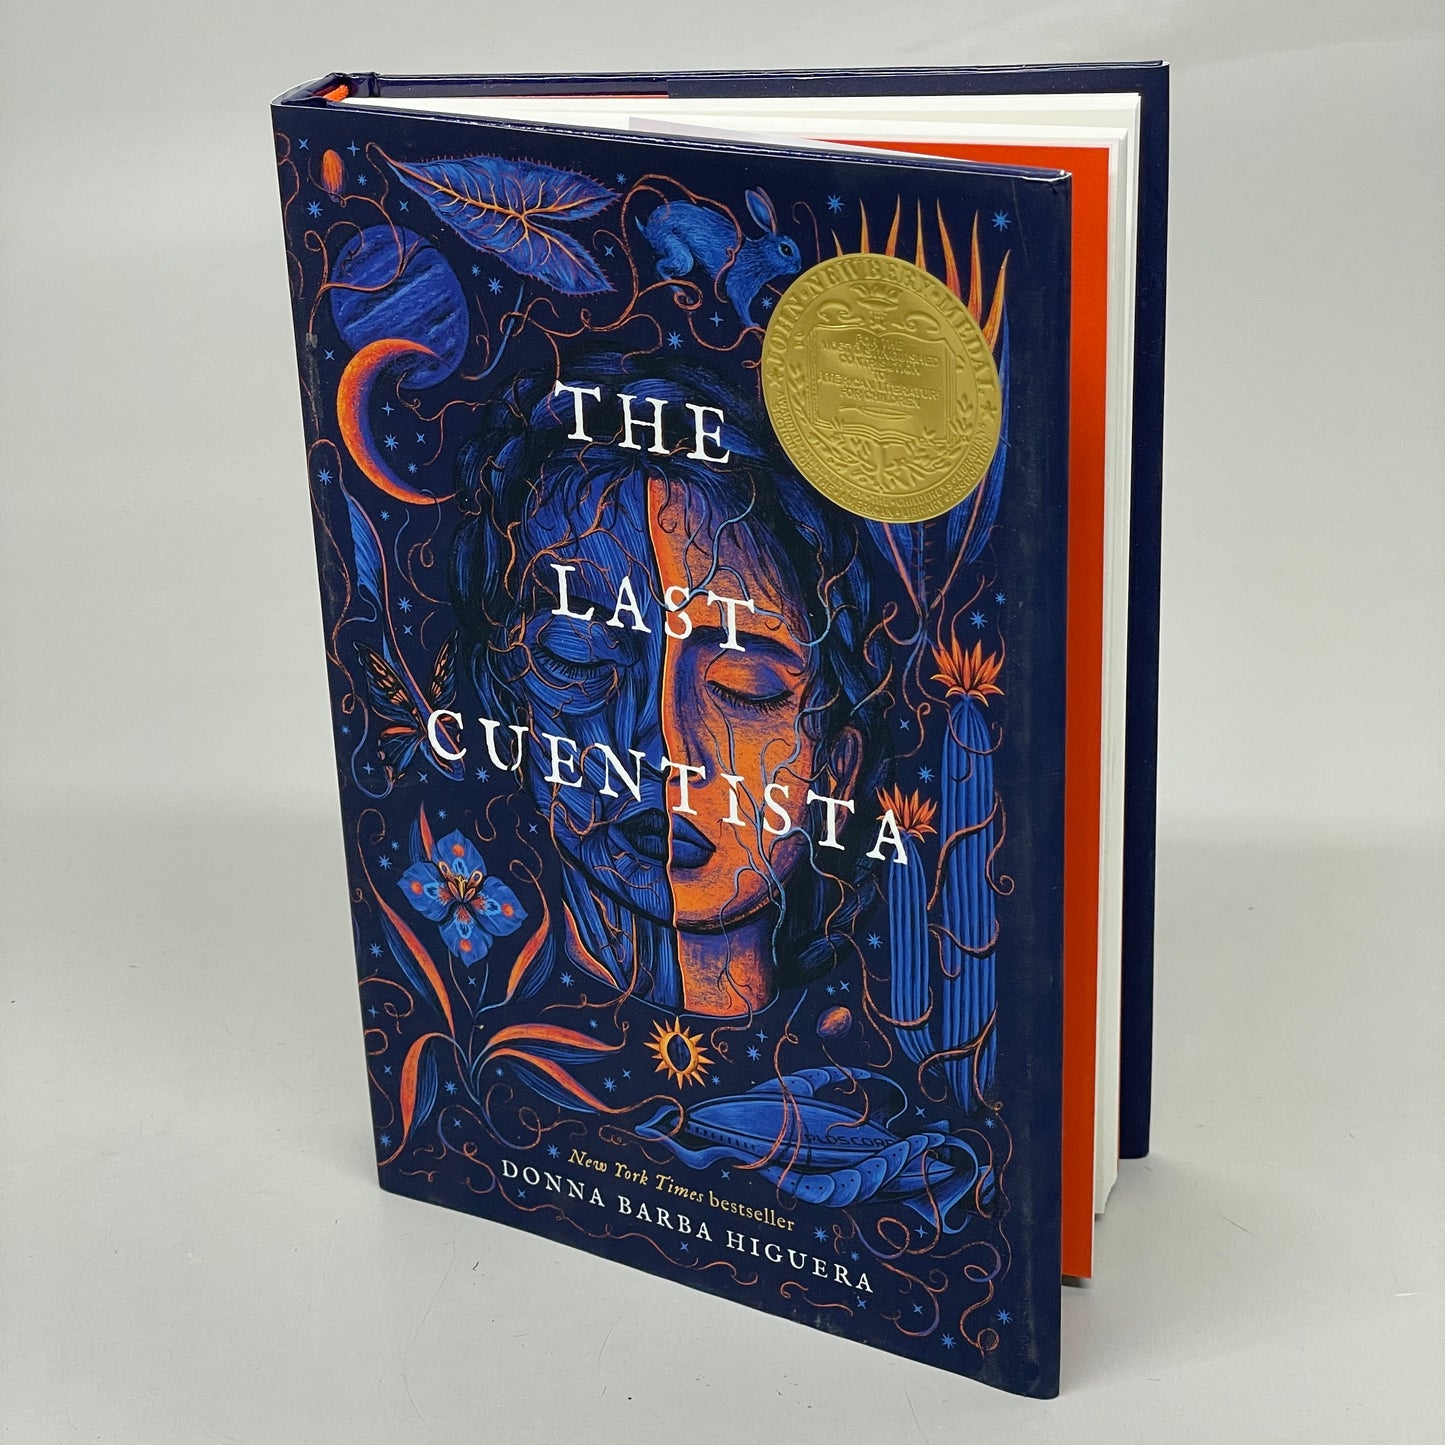 THE LAST CUENTISTA Hardcover Book By Newbery Medal Winner Donna Barba Higuera